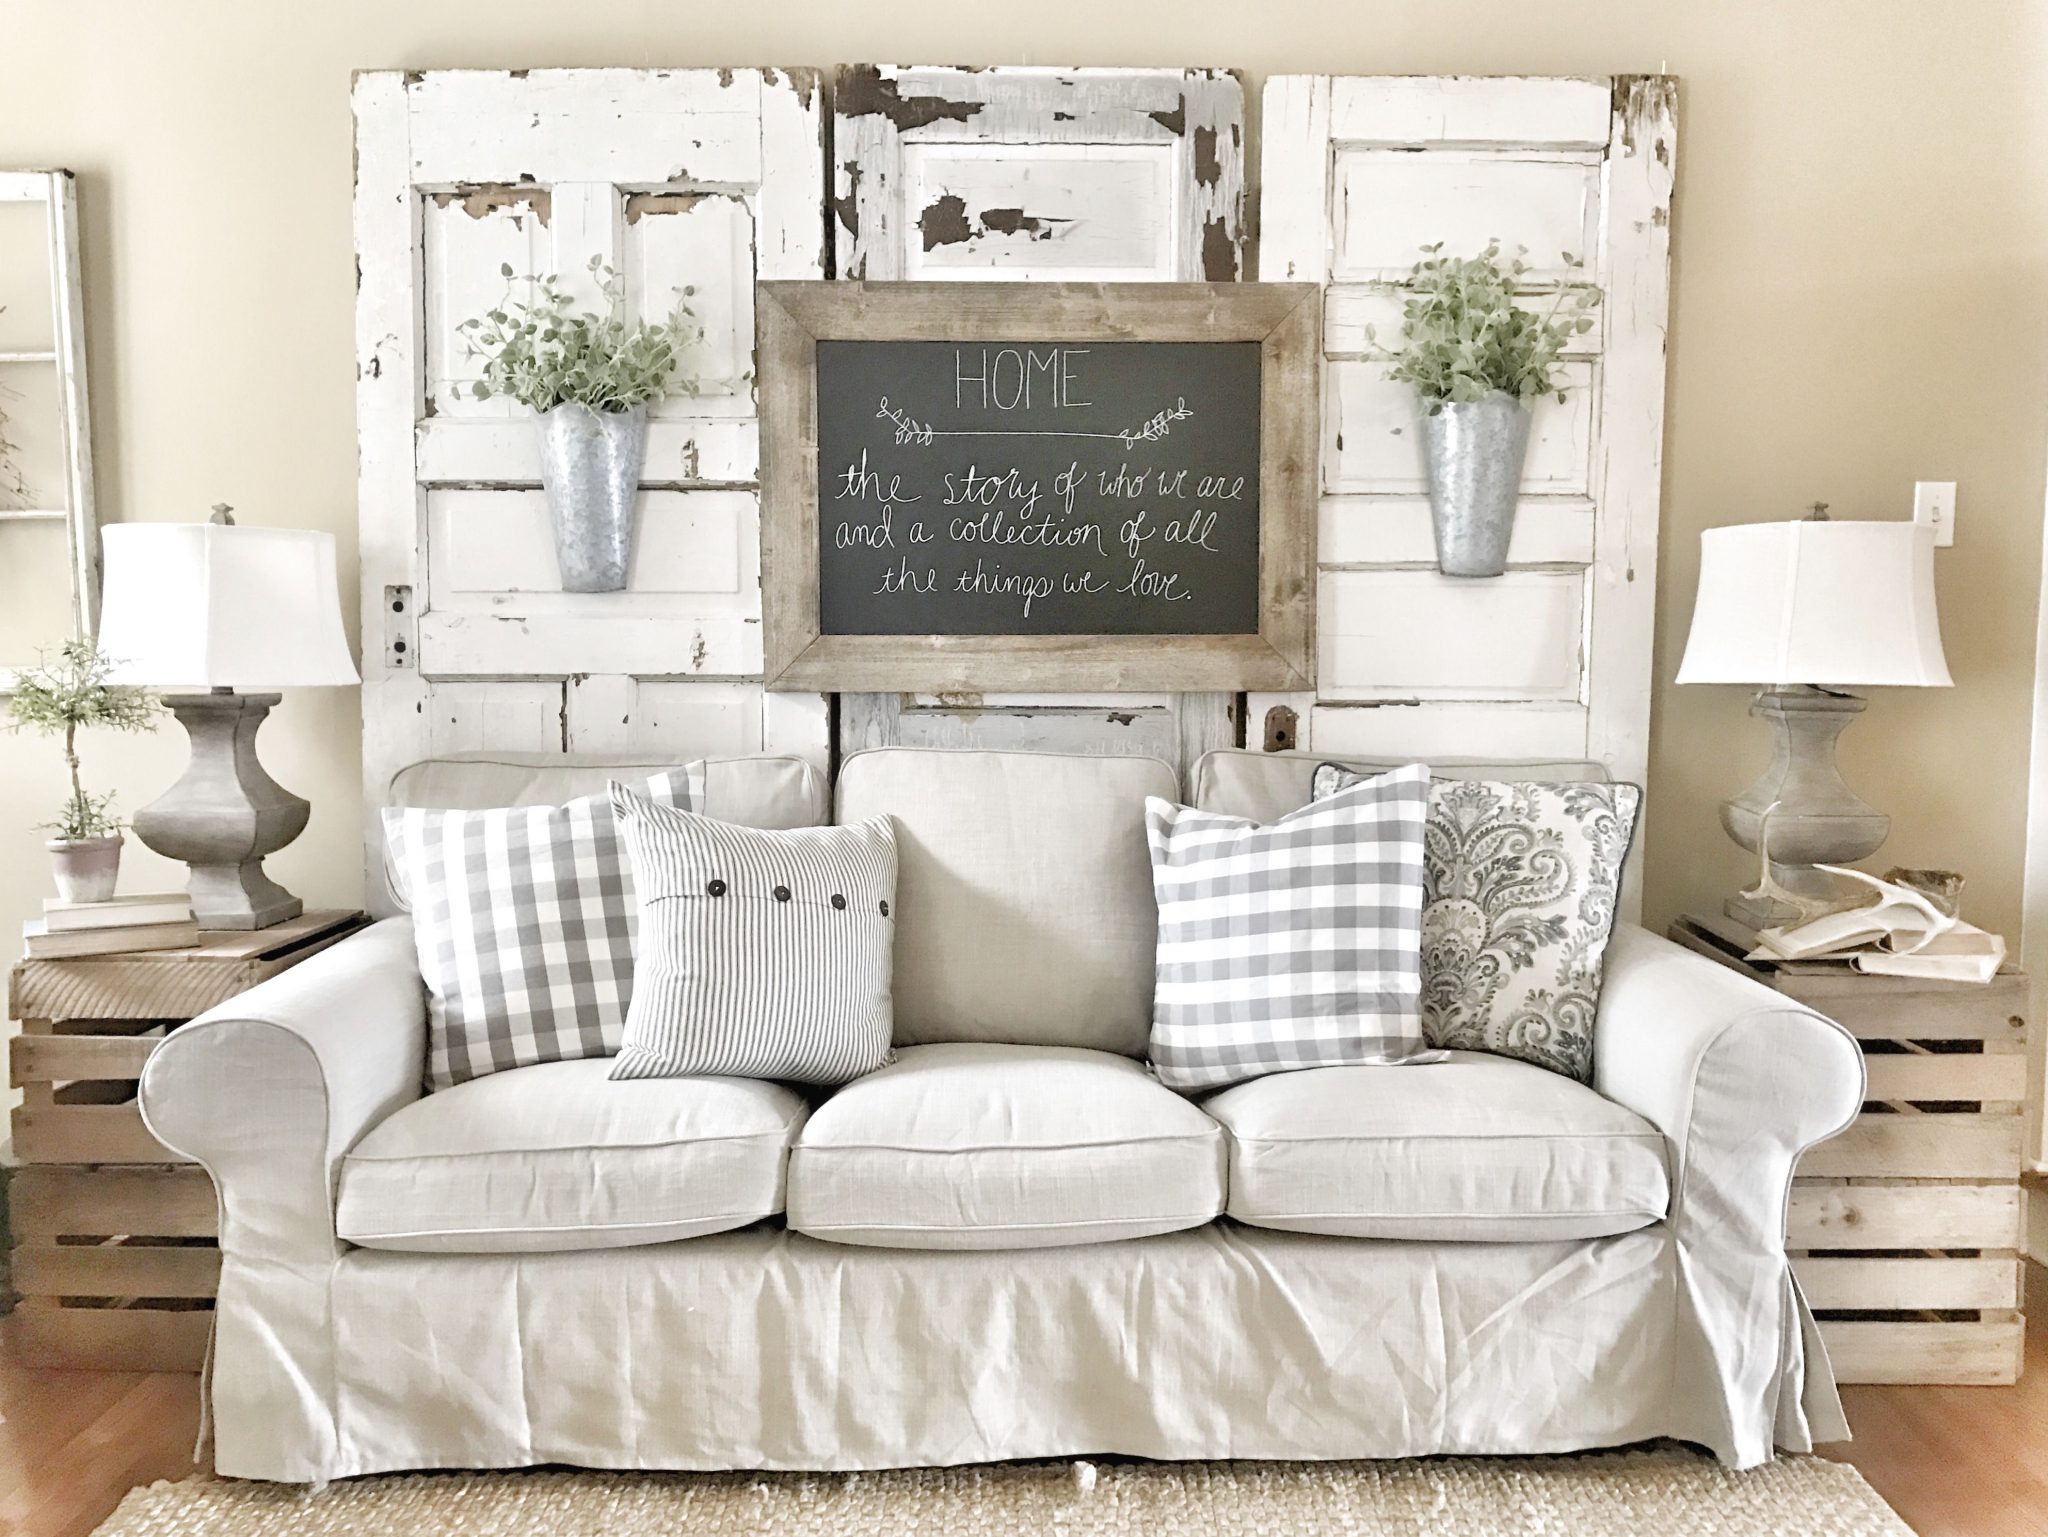 Small living room in shabby chic style.  Source: i.pinimg.com